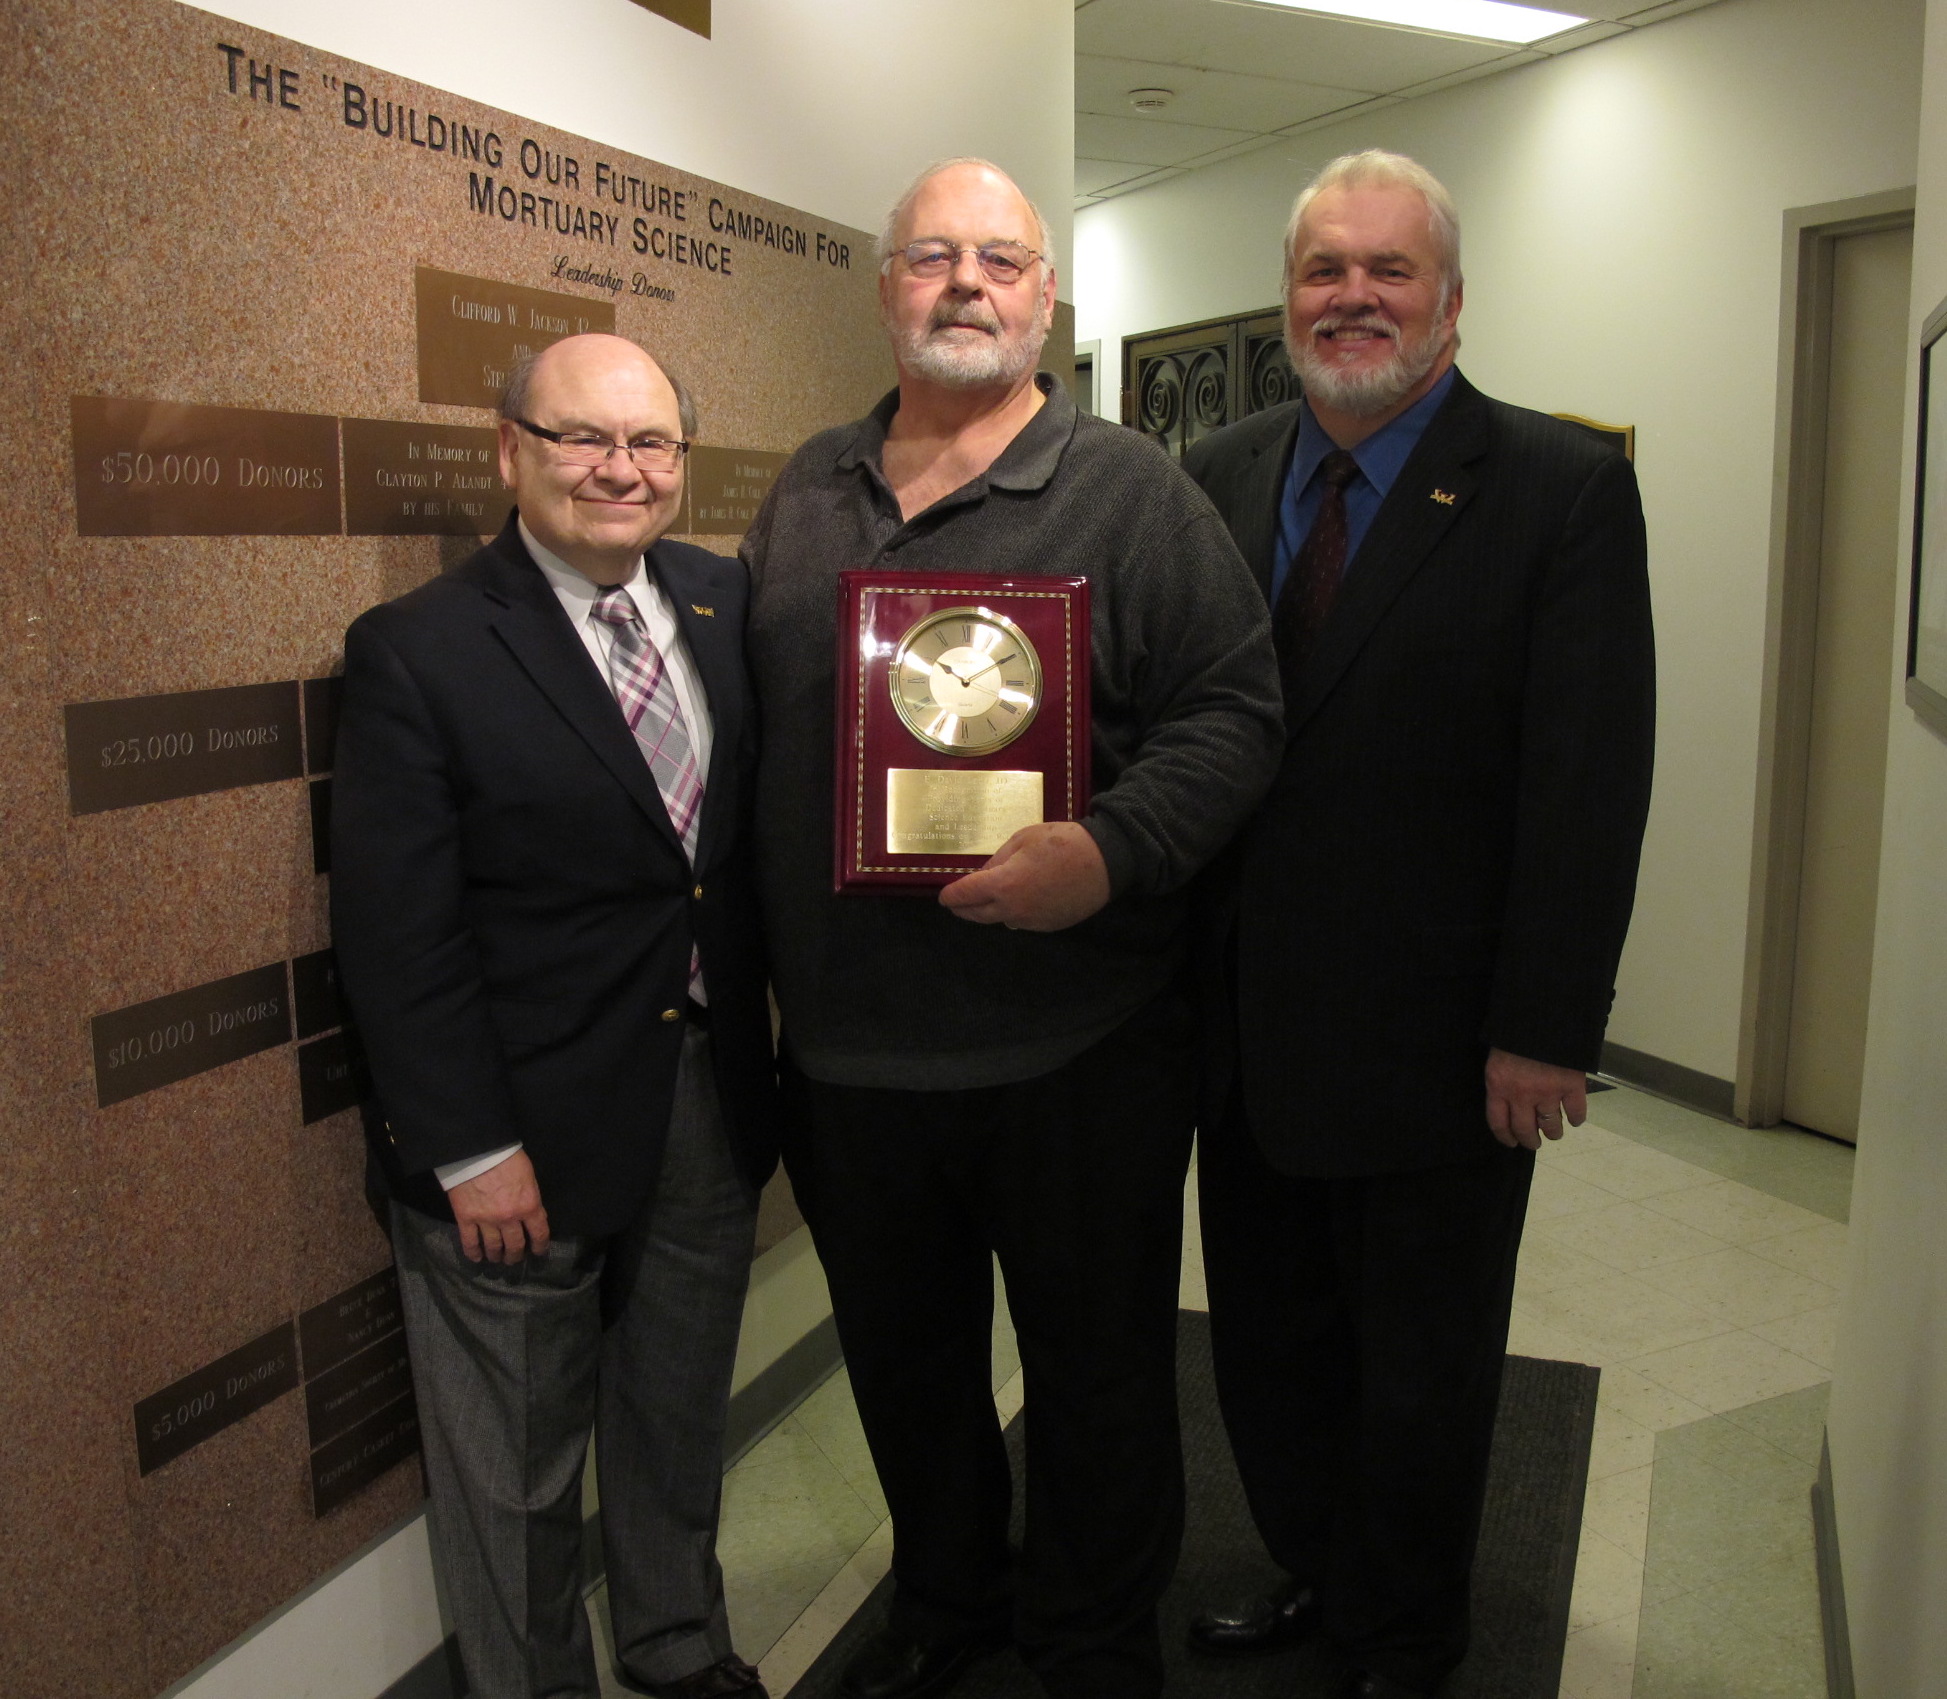 Peter Frade, David Ladd and Howard Normile at Ladd's 2013 retirement party in the Mortuary Science Building